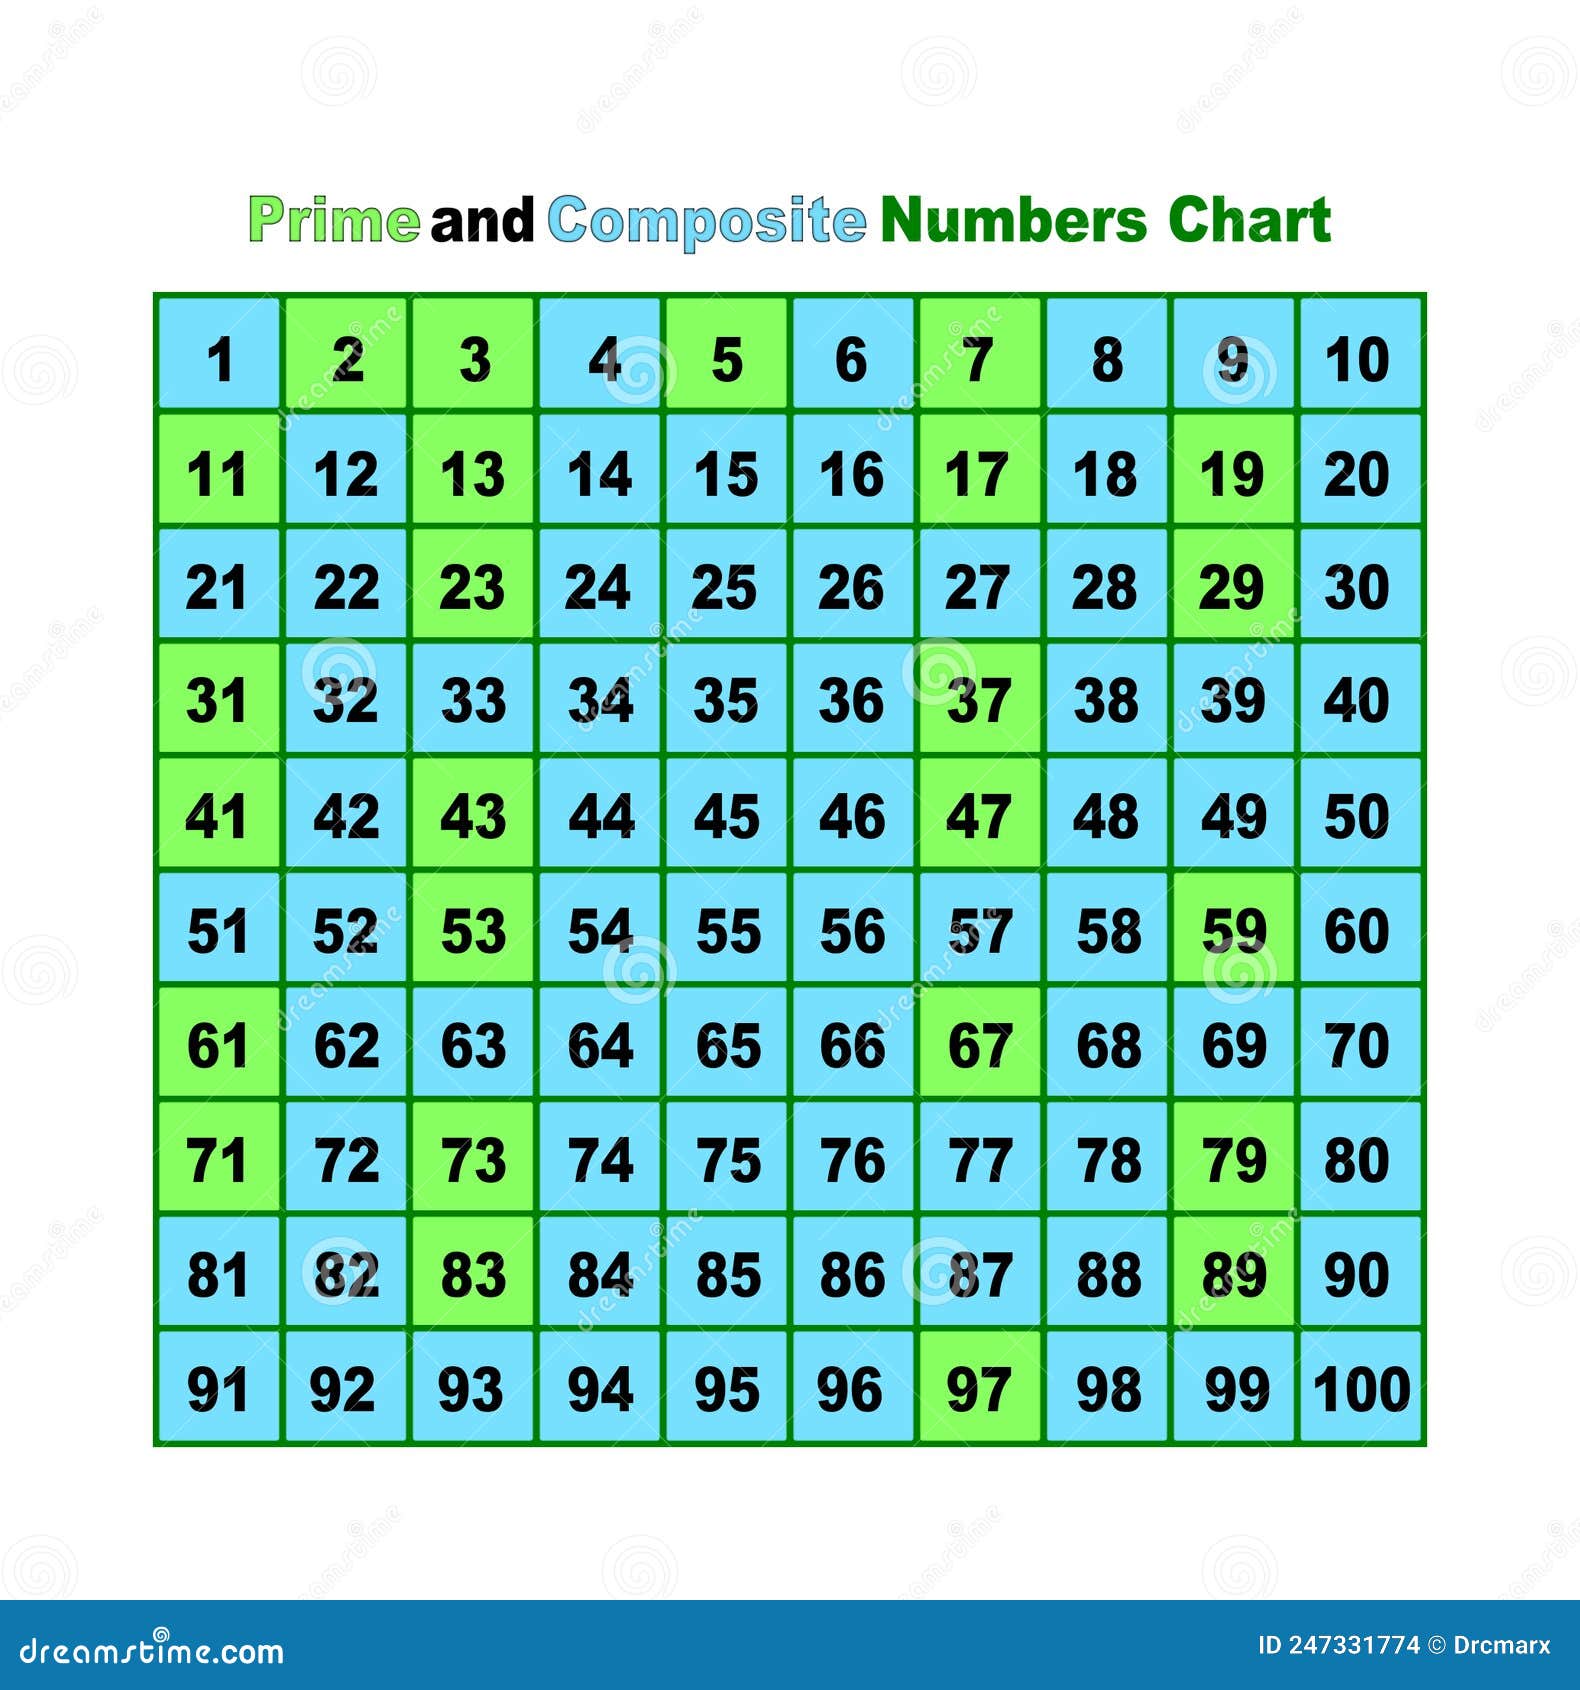 a-prime-and-composite-numbers-chart-royalty-free-cartoon